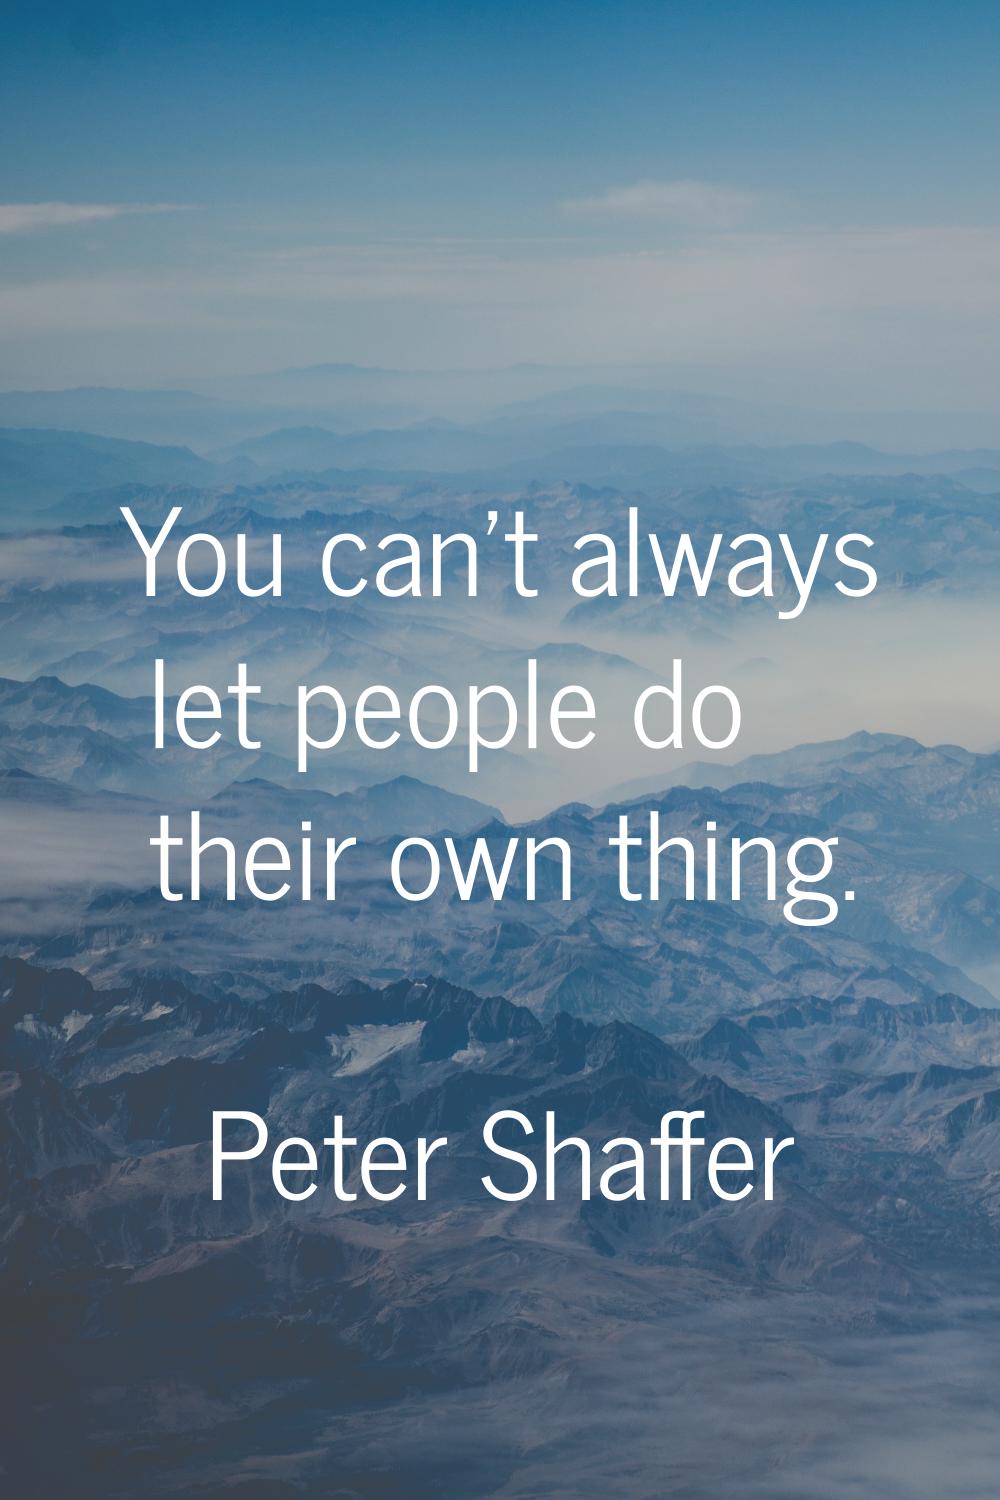 You can't always let people do their own thing.